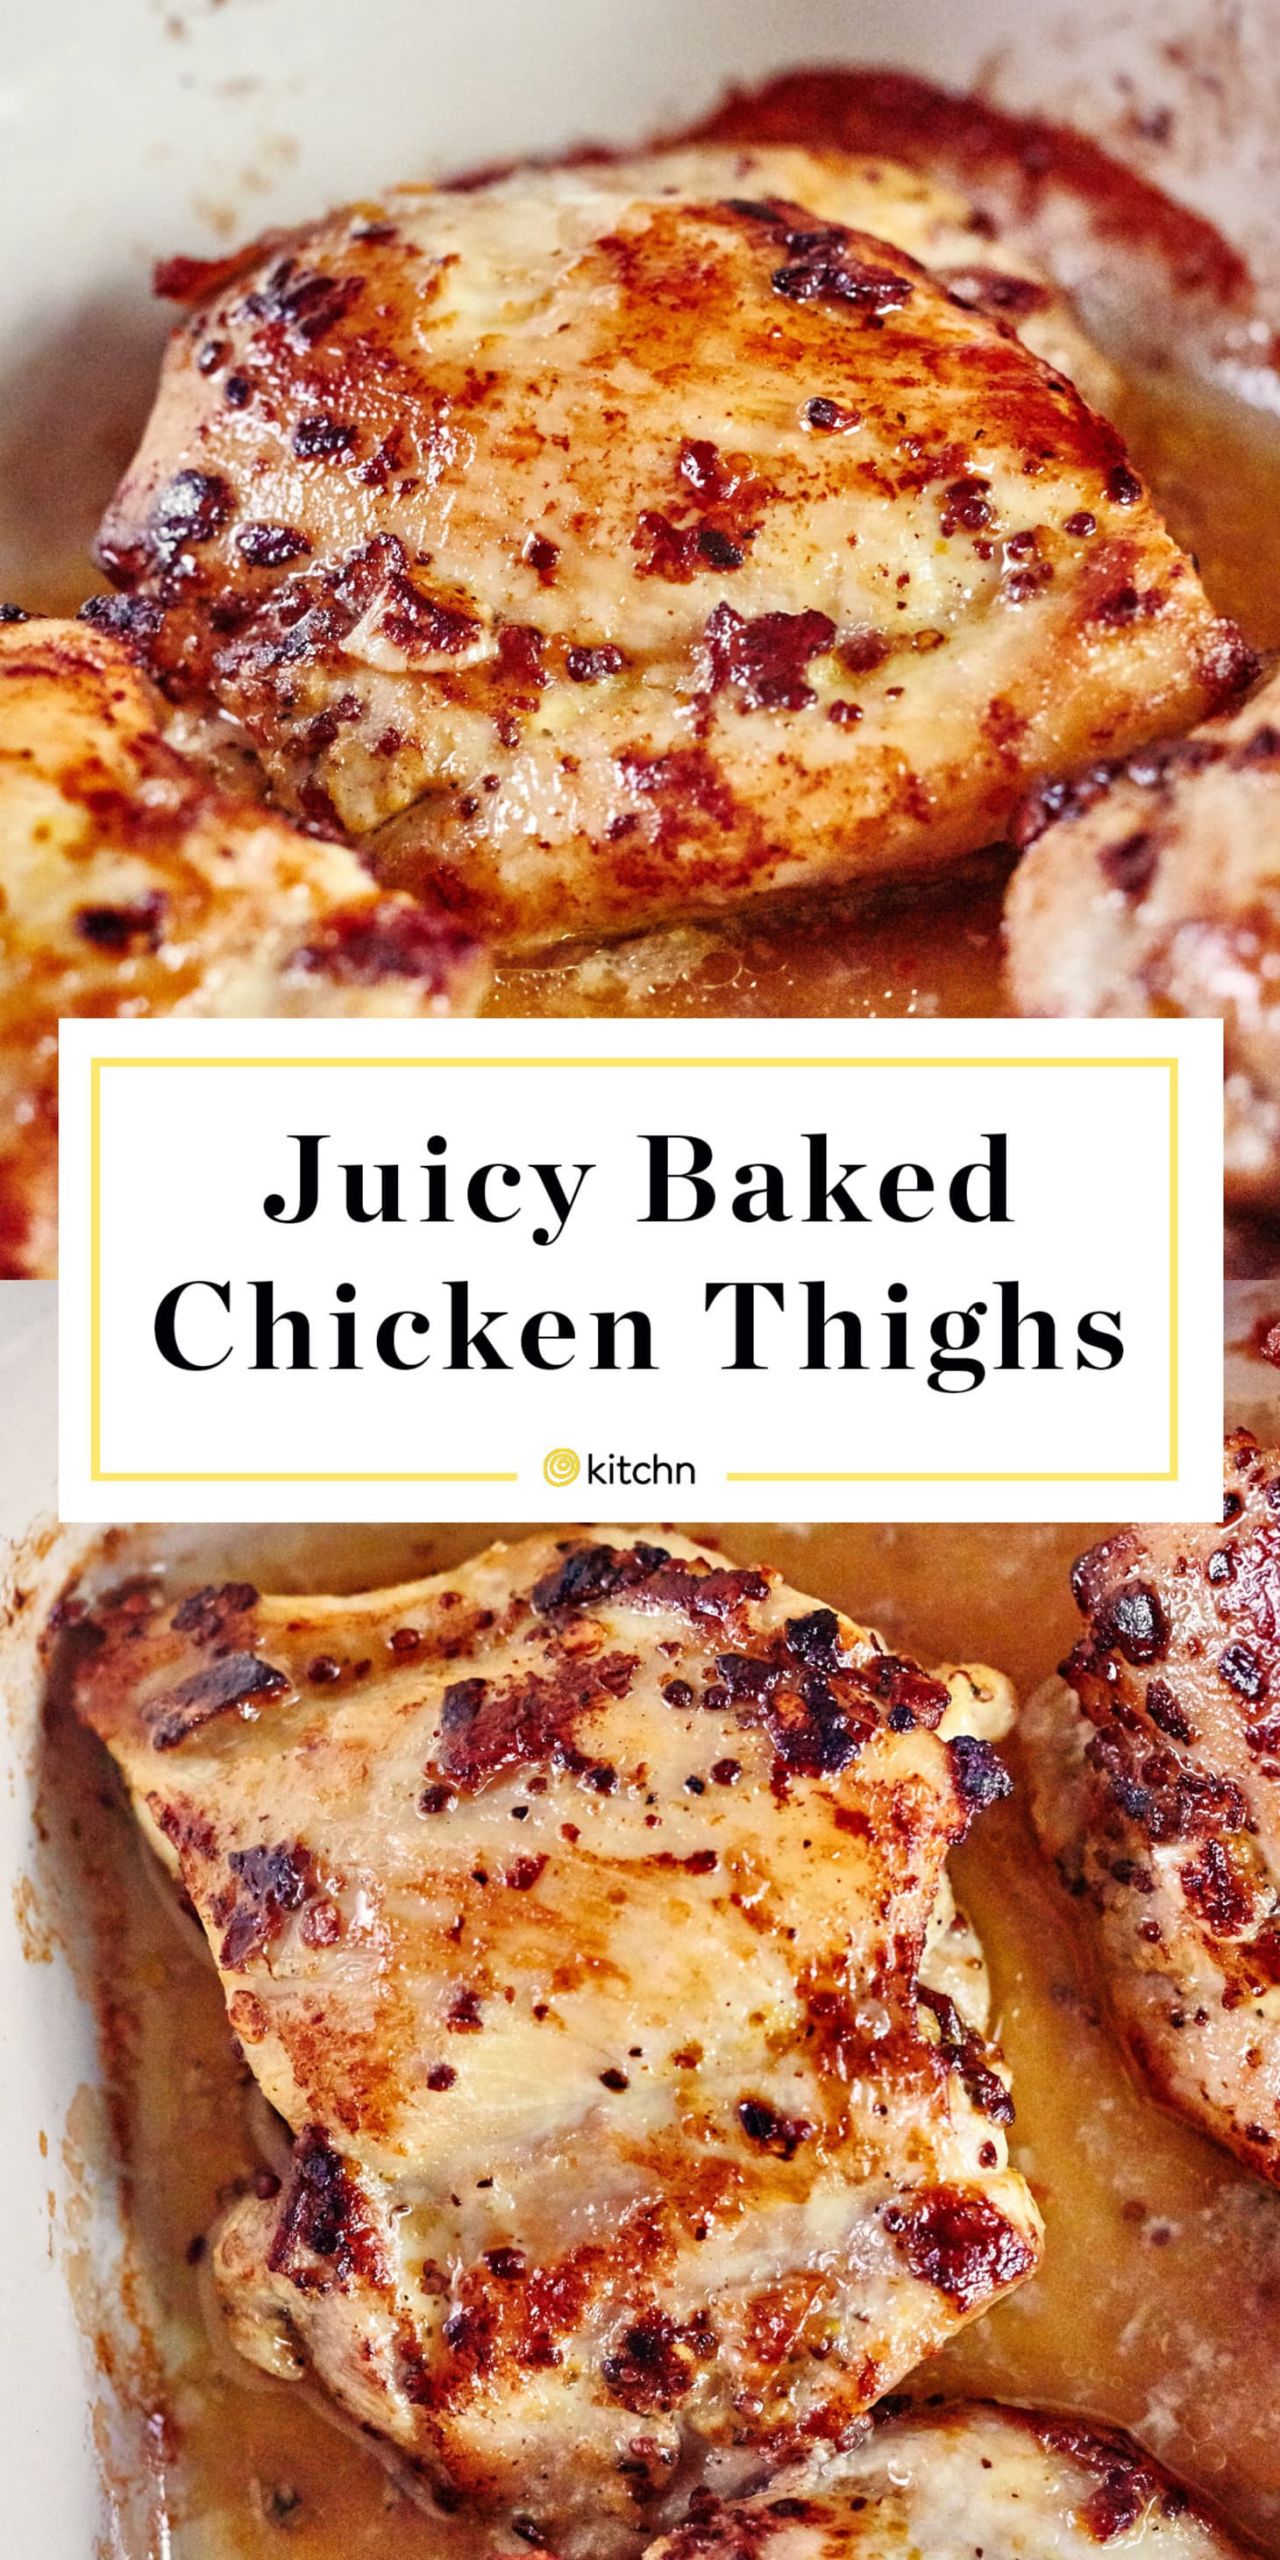 Baked Chicken Thighs Boneless Skinless
 How To Cook Boneless Skinless Chicken Thighs in the Oven